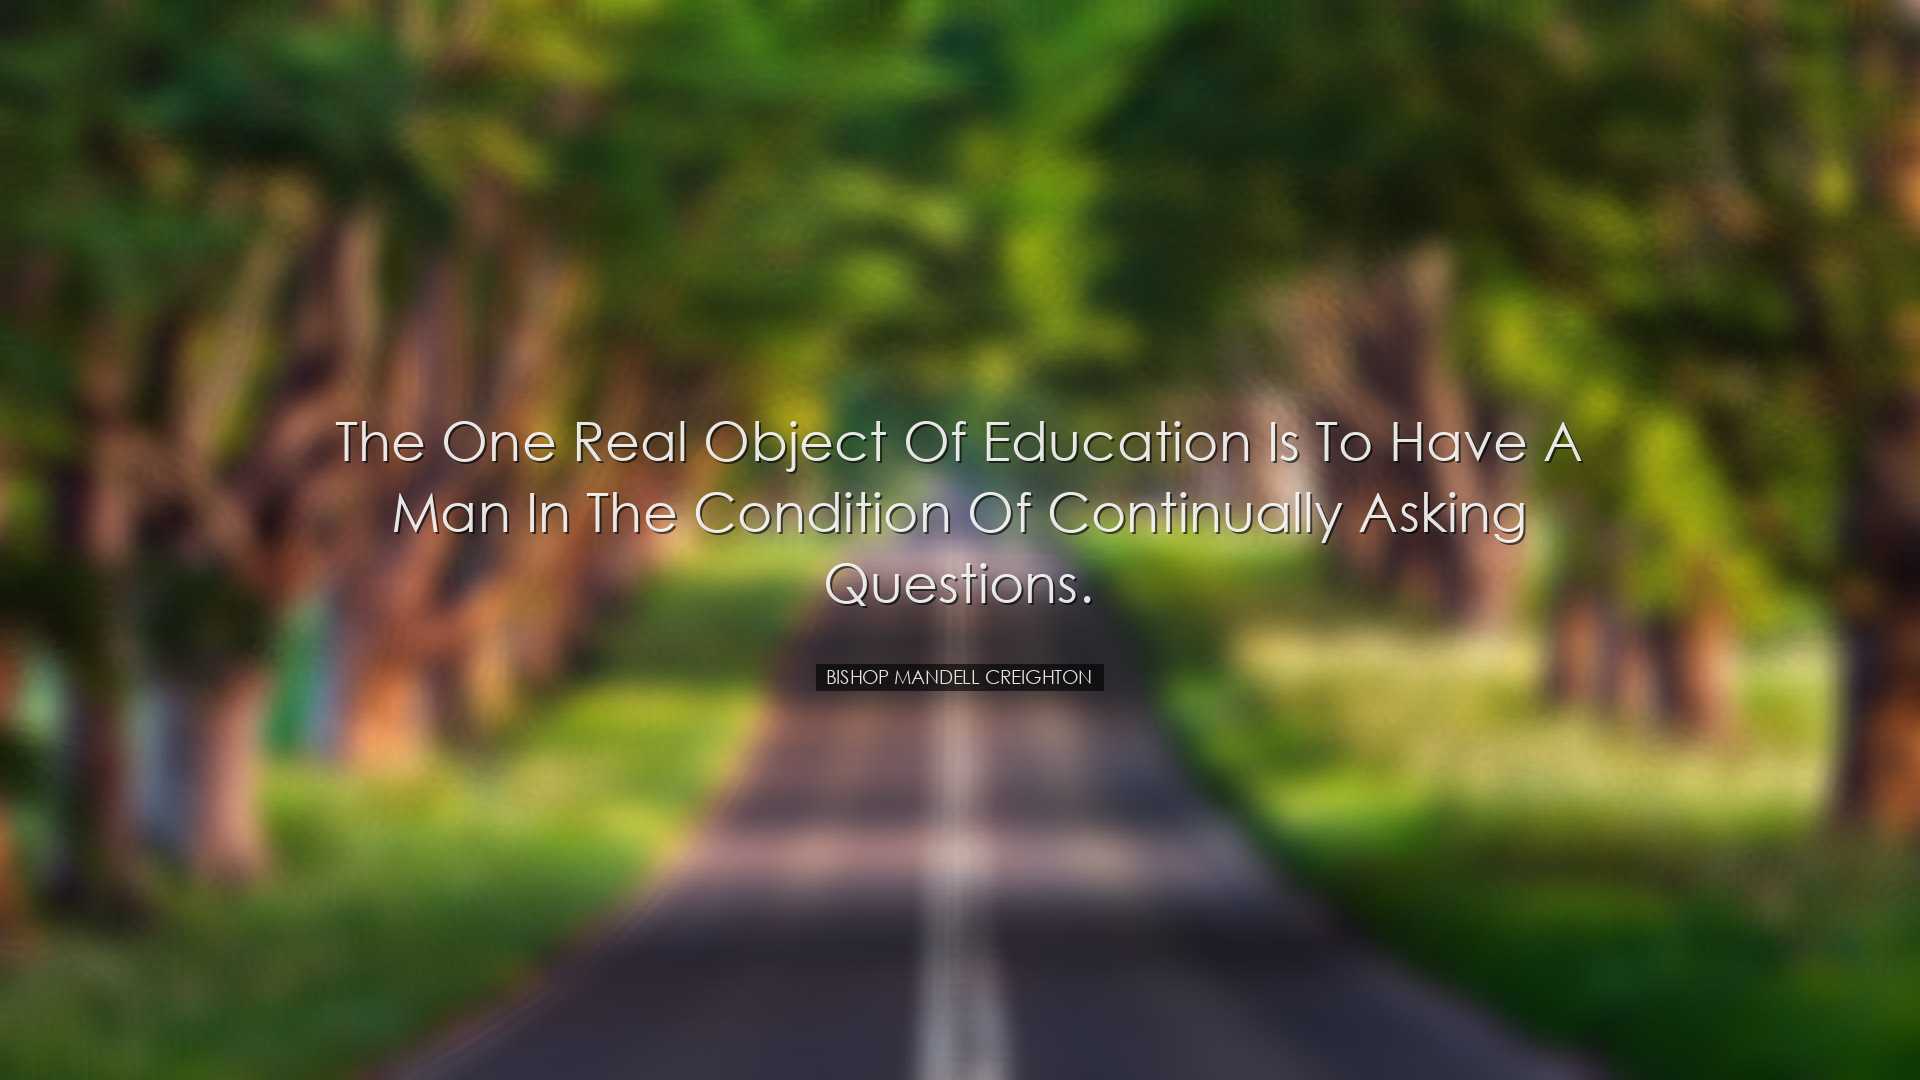 The one real object of education is to have a man in the condition